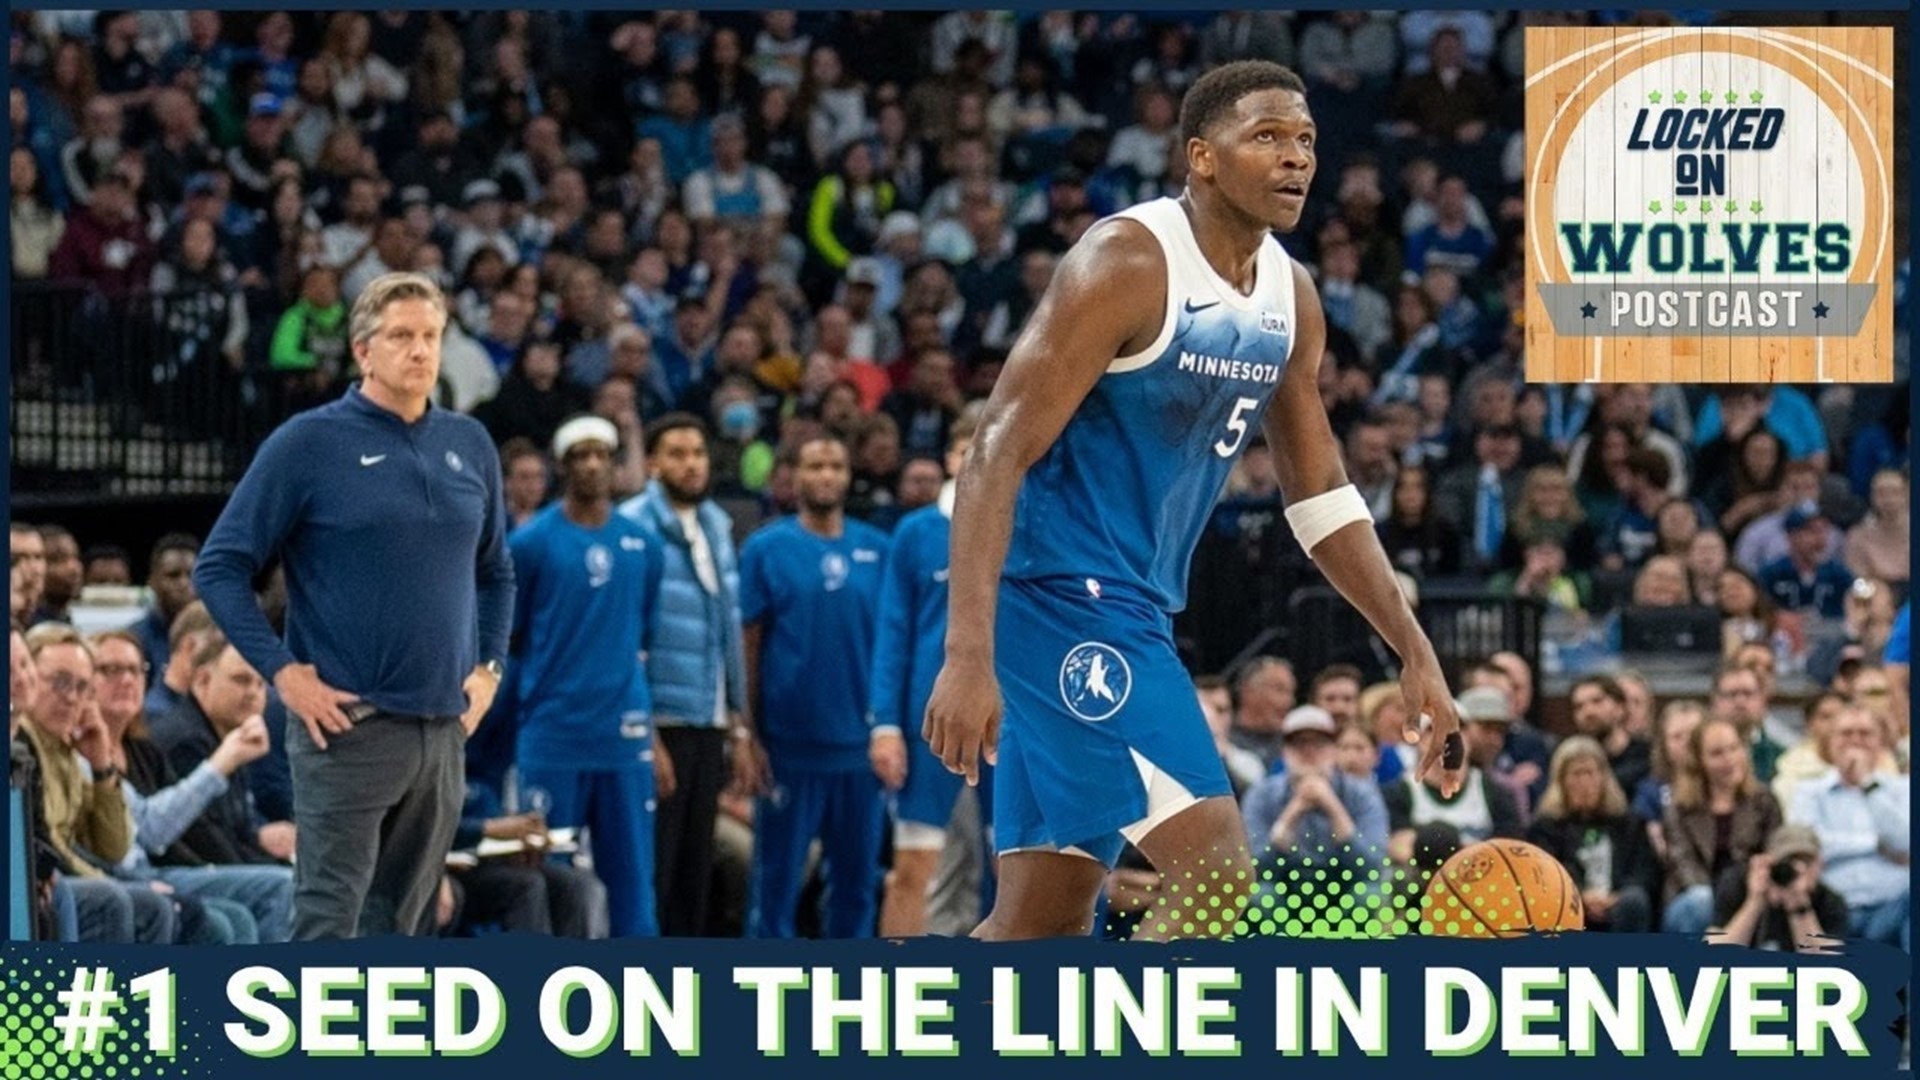 The Minnesota Timberwolves battled the Denver Nuggets for the #1 seed but came up short. Luke Inman and Jack Borman break down the action.